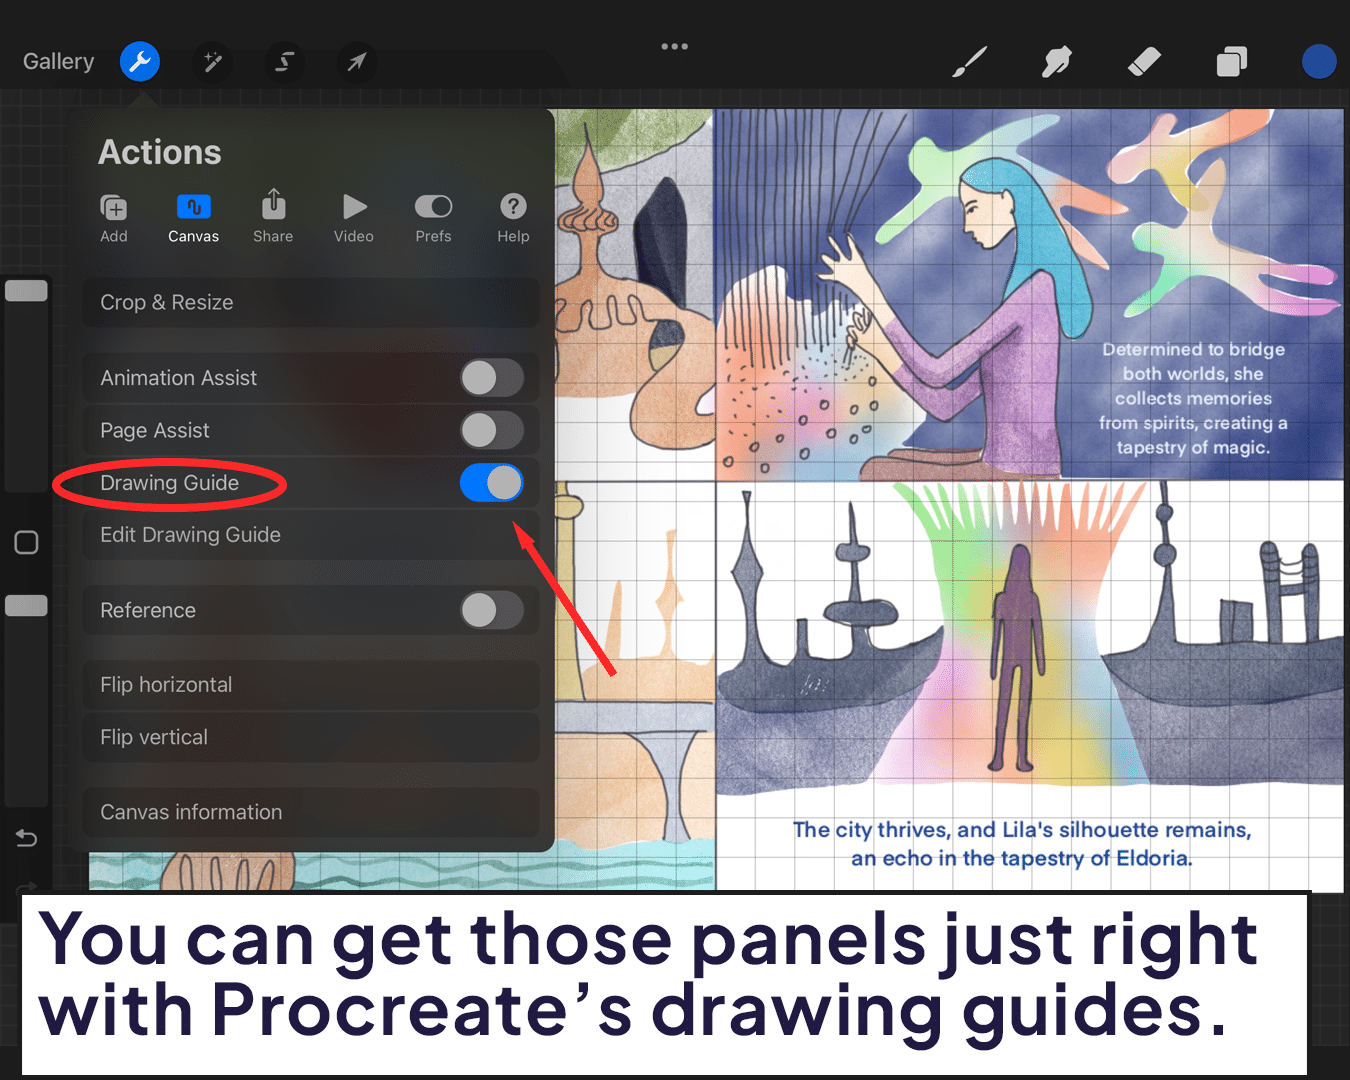 Procreate's drawing guides 